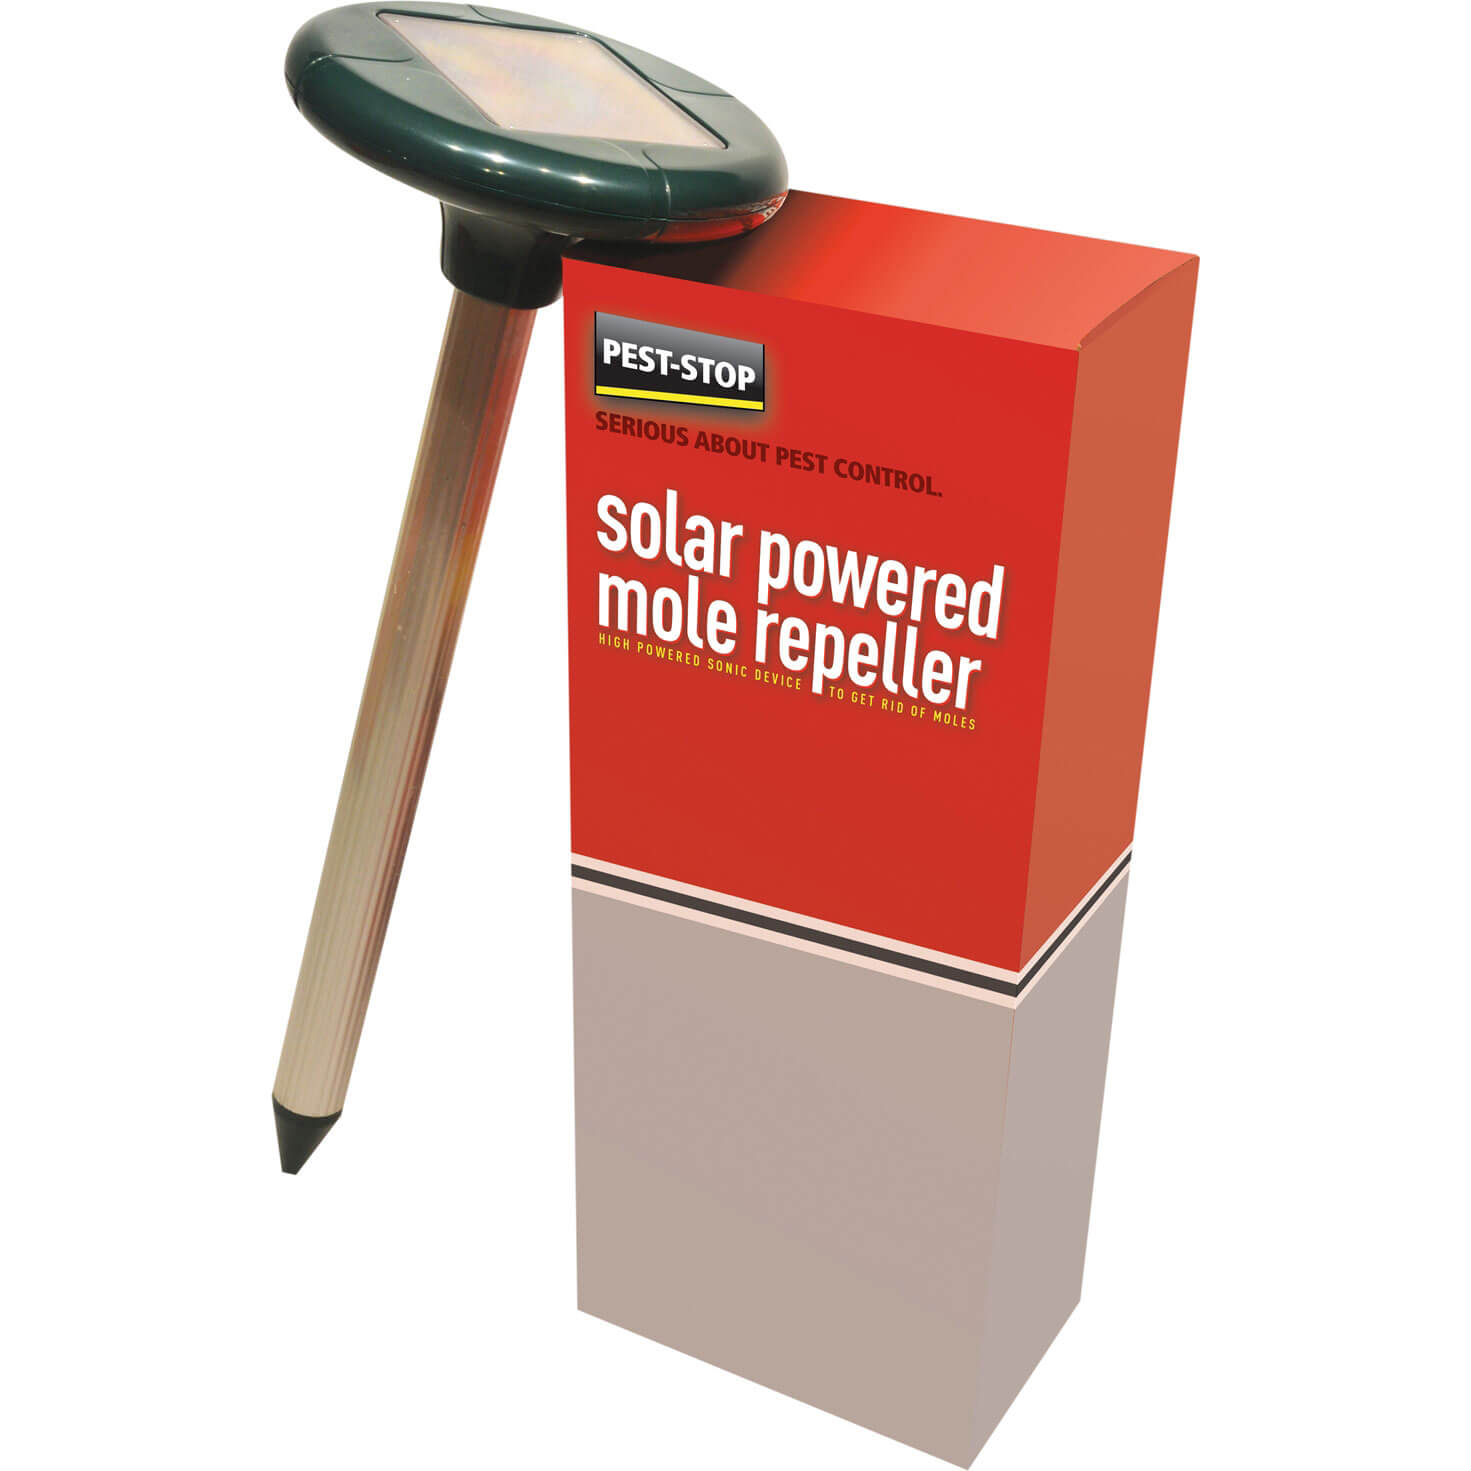 Proctor Brothers Solar Powered Mole Repeller